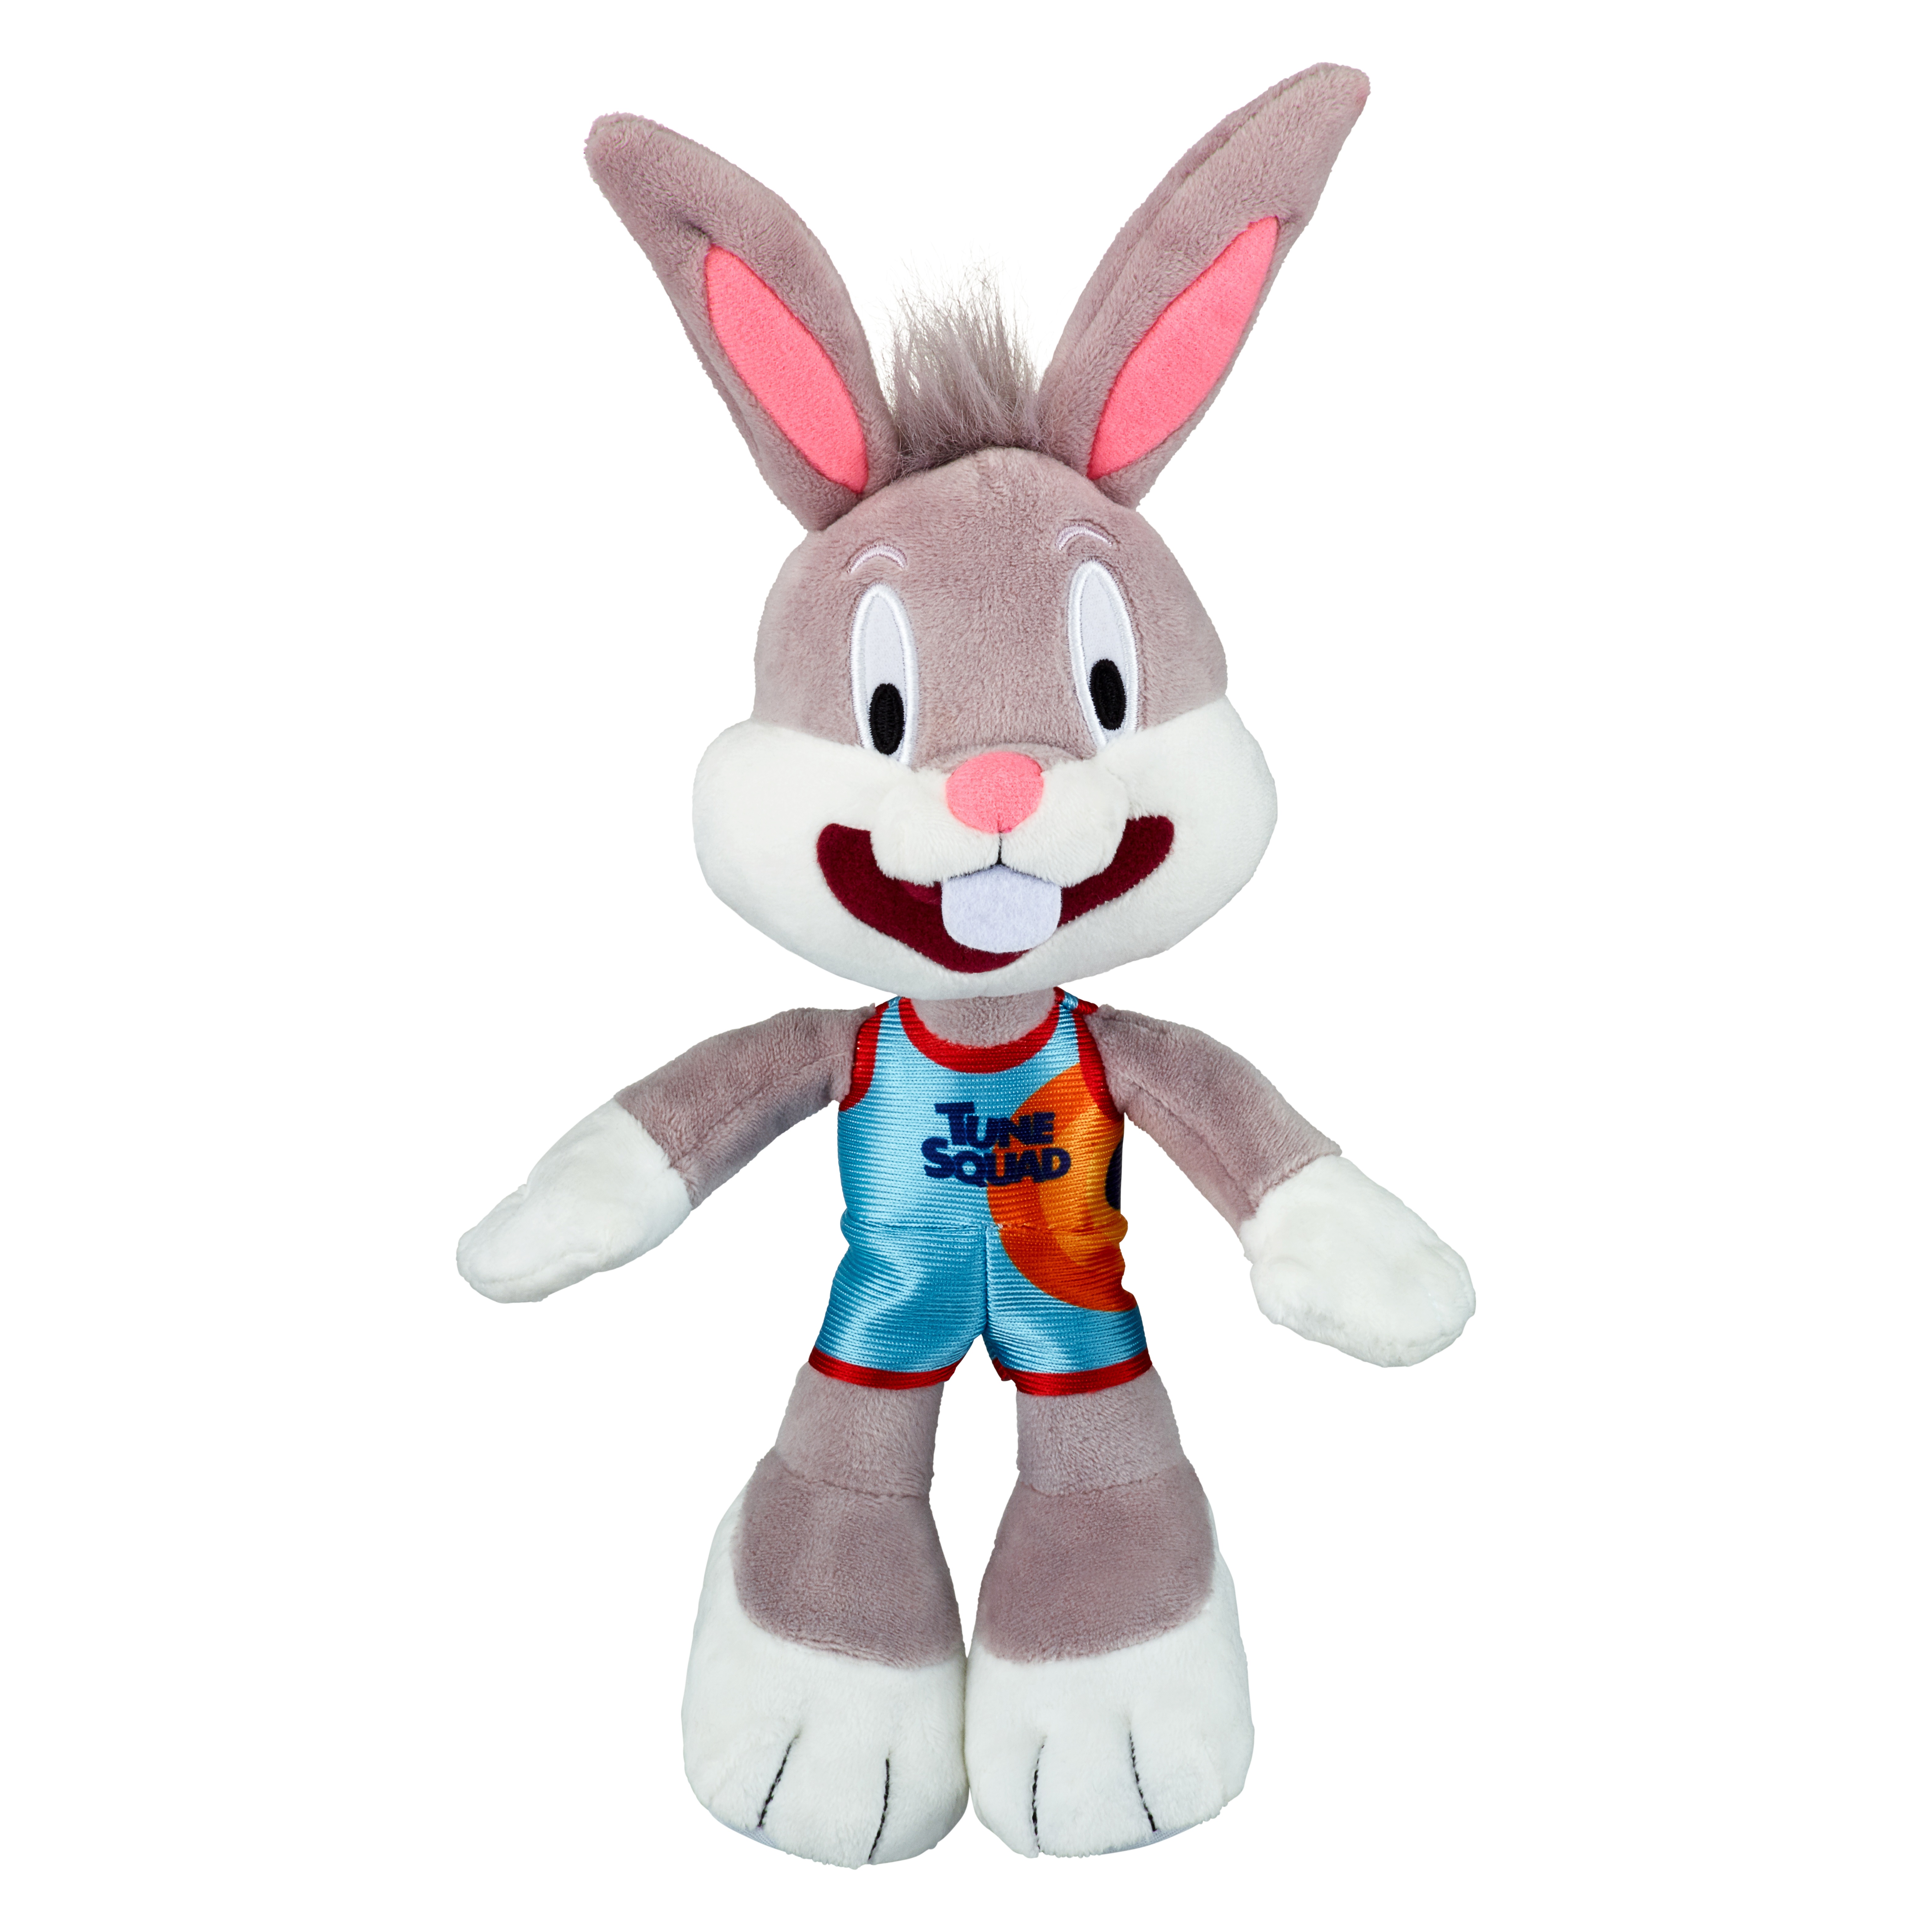 SPACE JAM BUGS BUNNY カーペット 超人気の